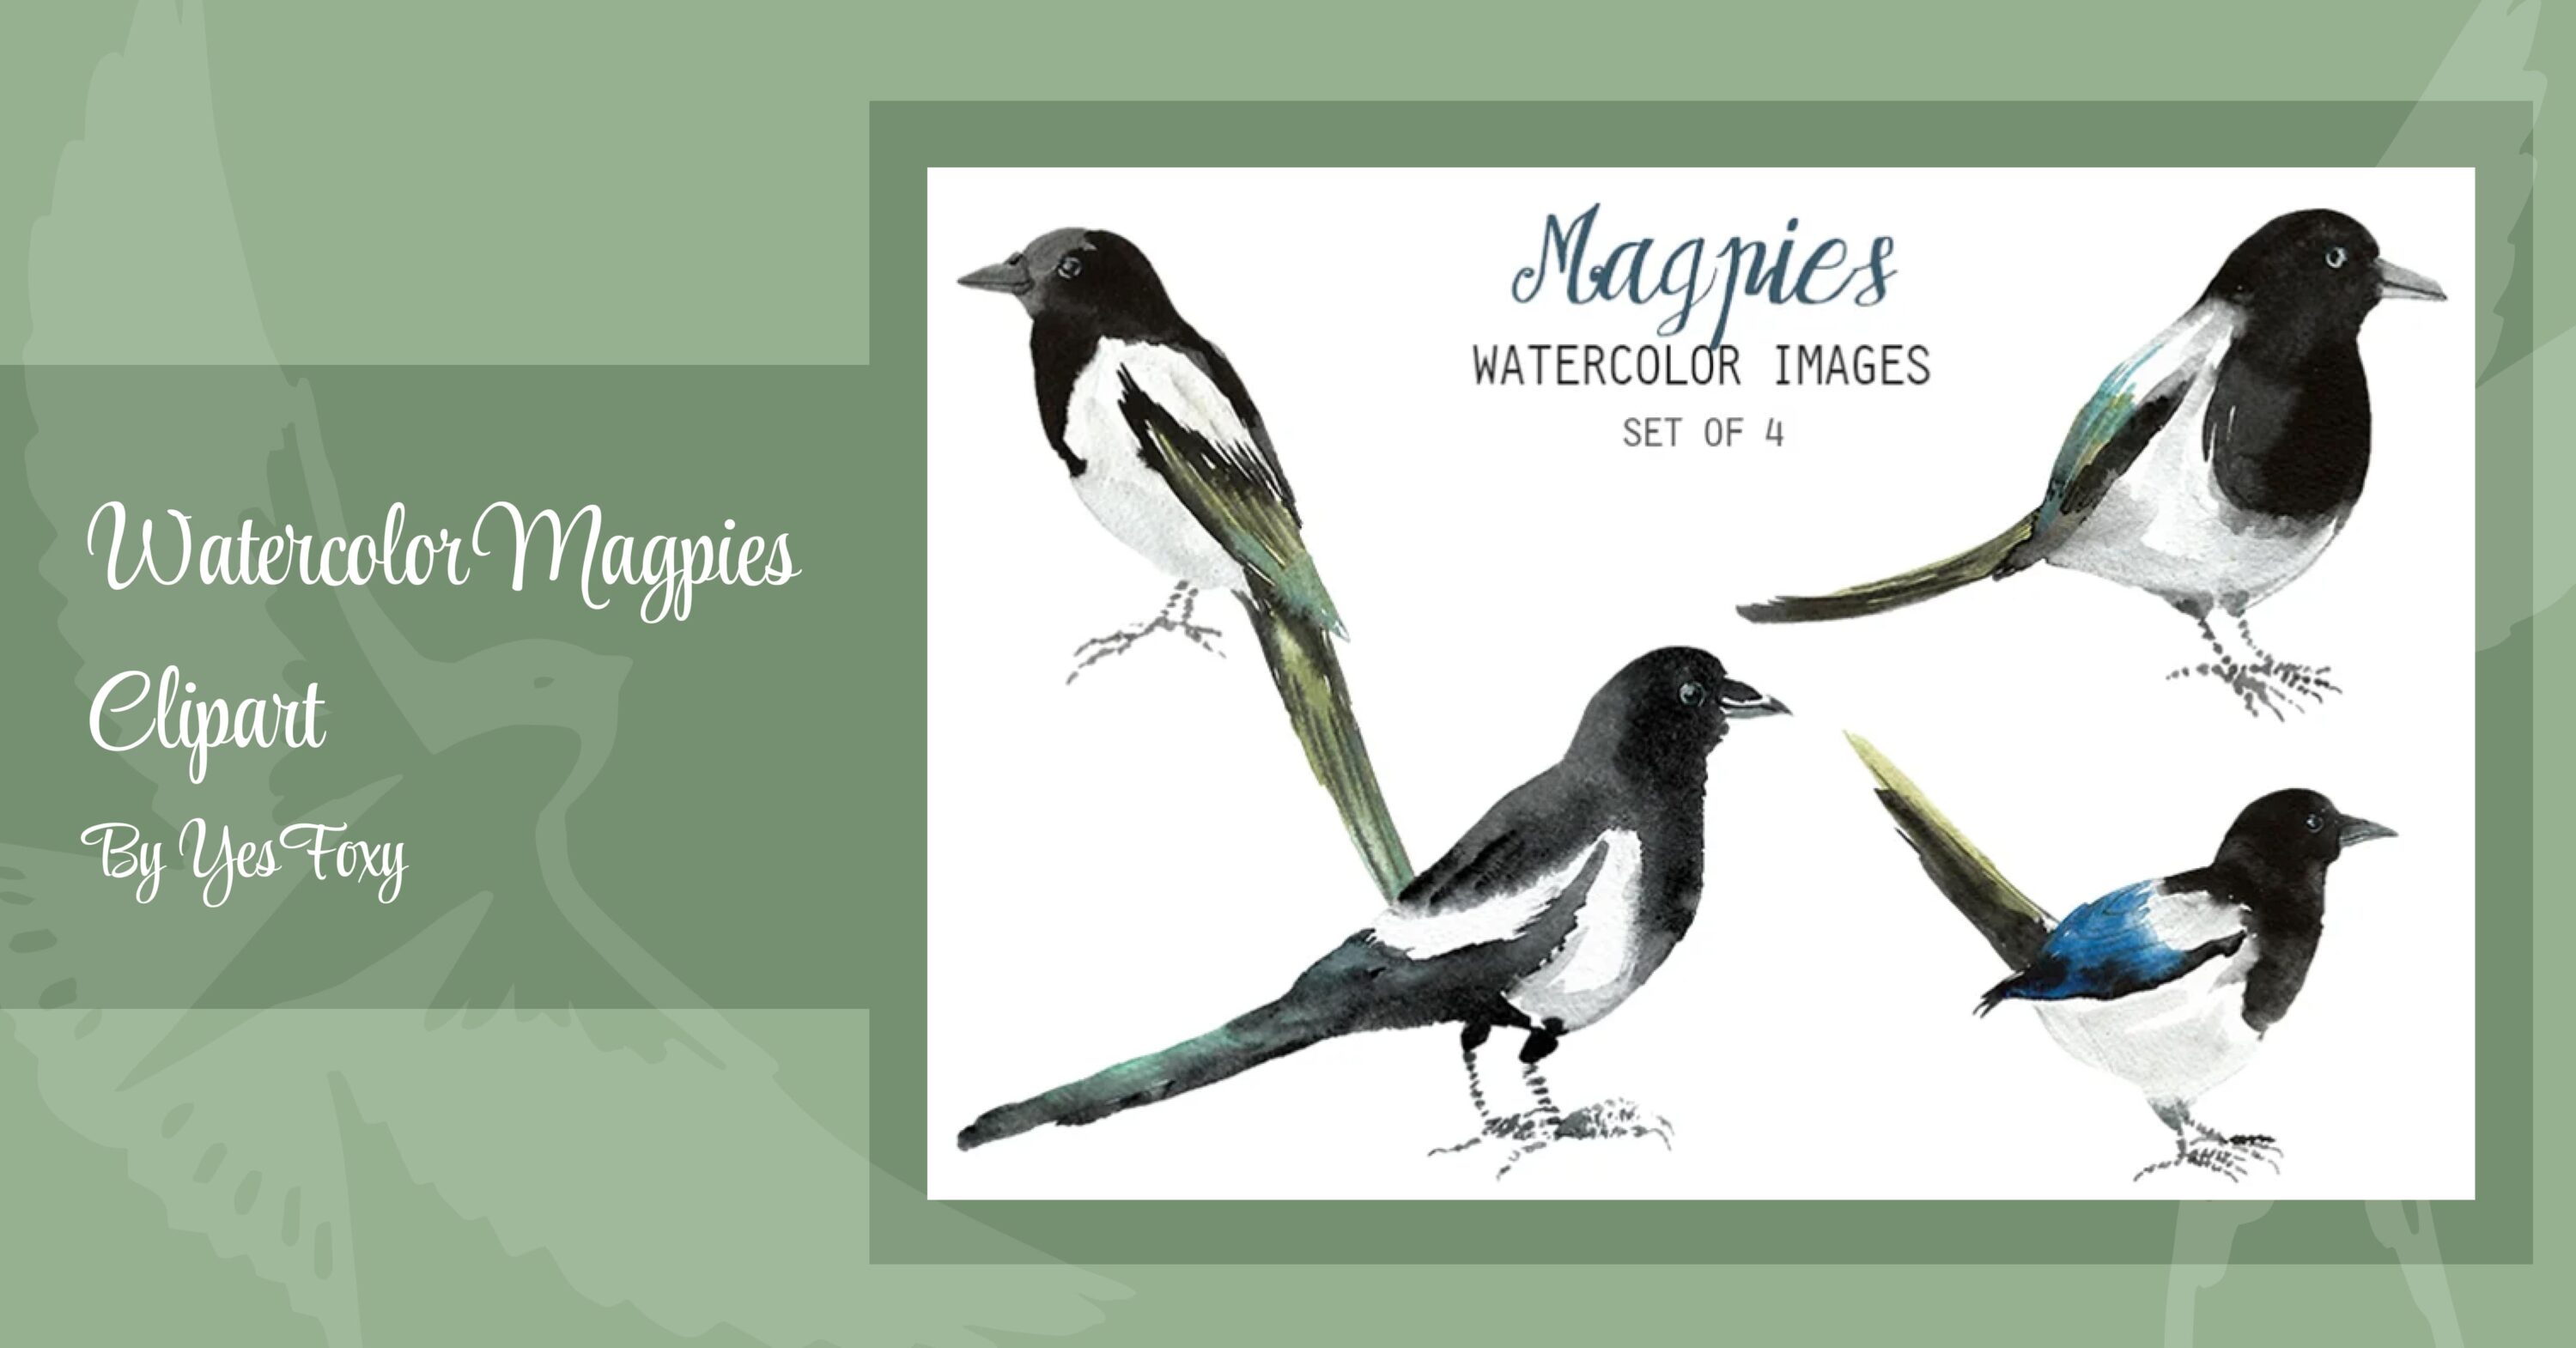 Watercolor Magpies Clipart facebook image.